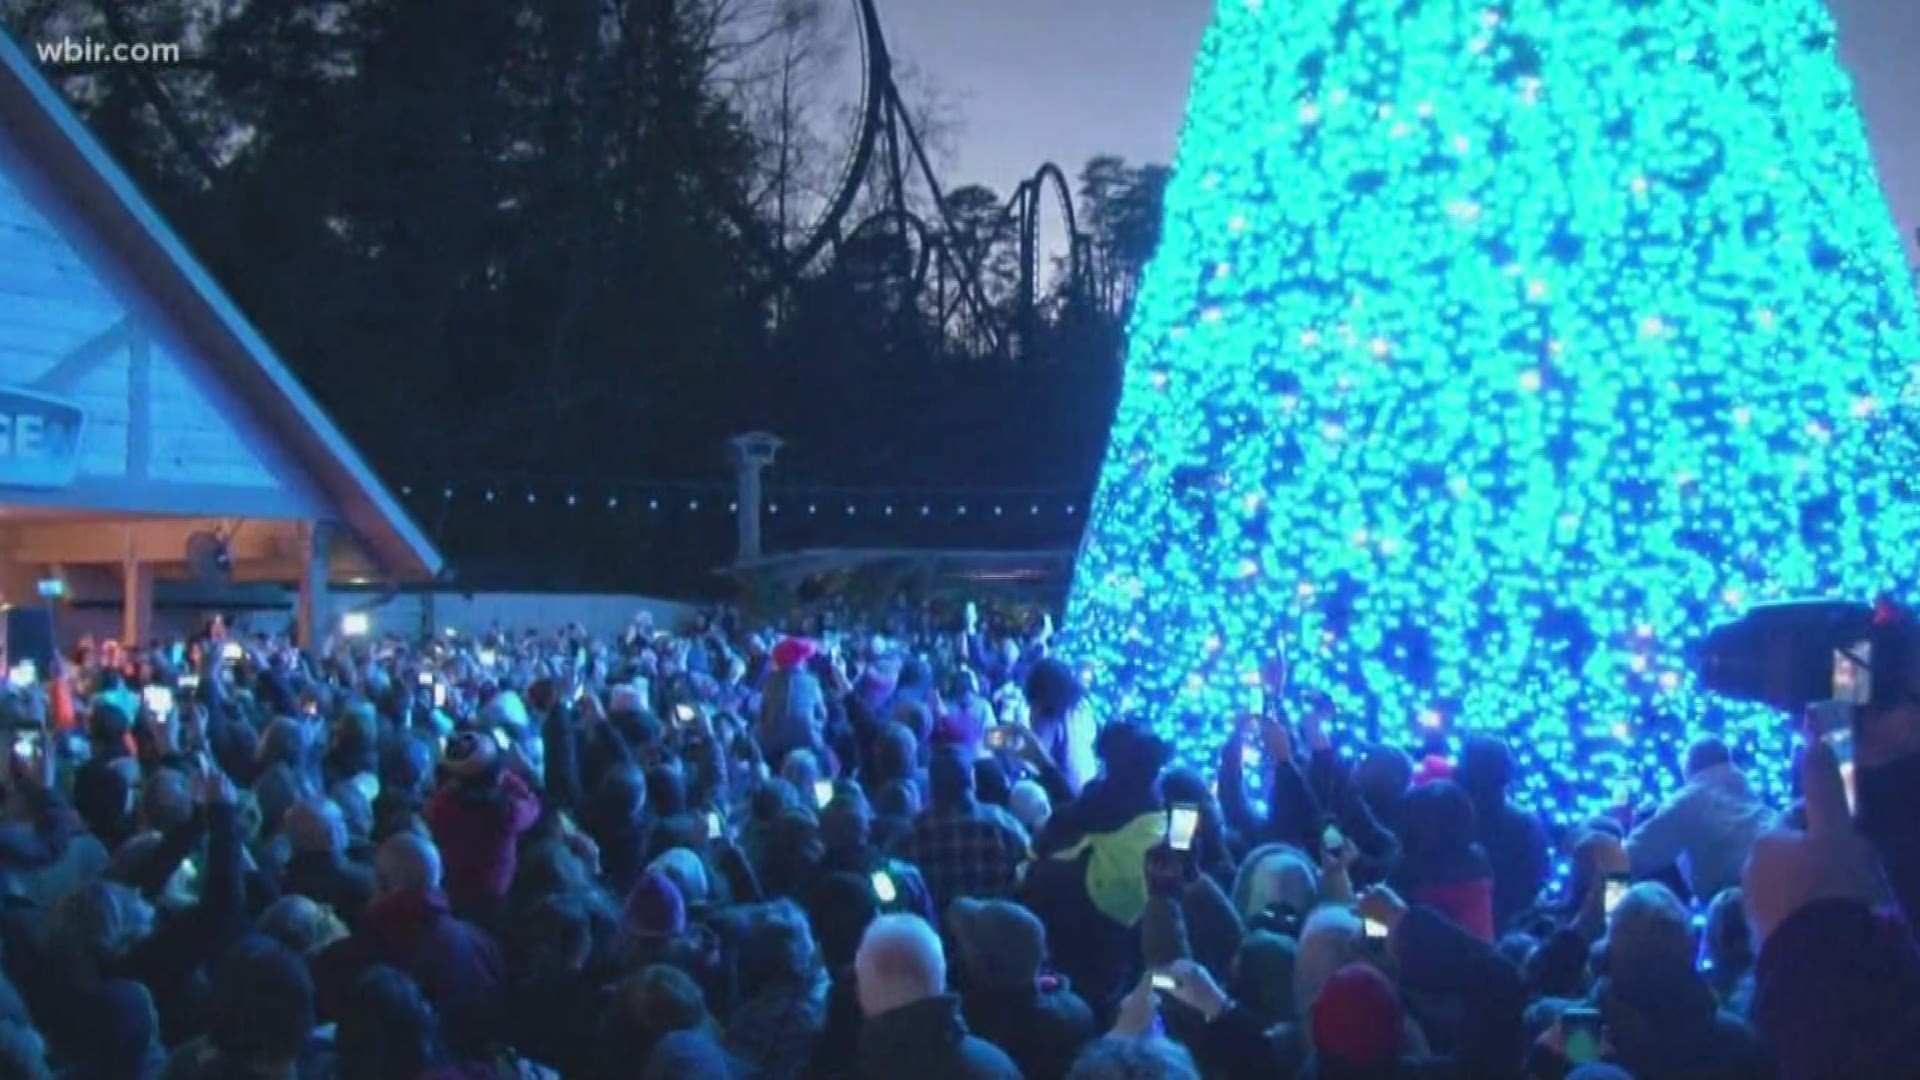 Dollywood tree lights up for Christmas